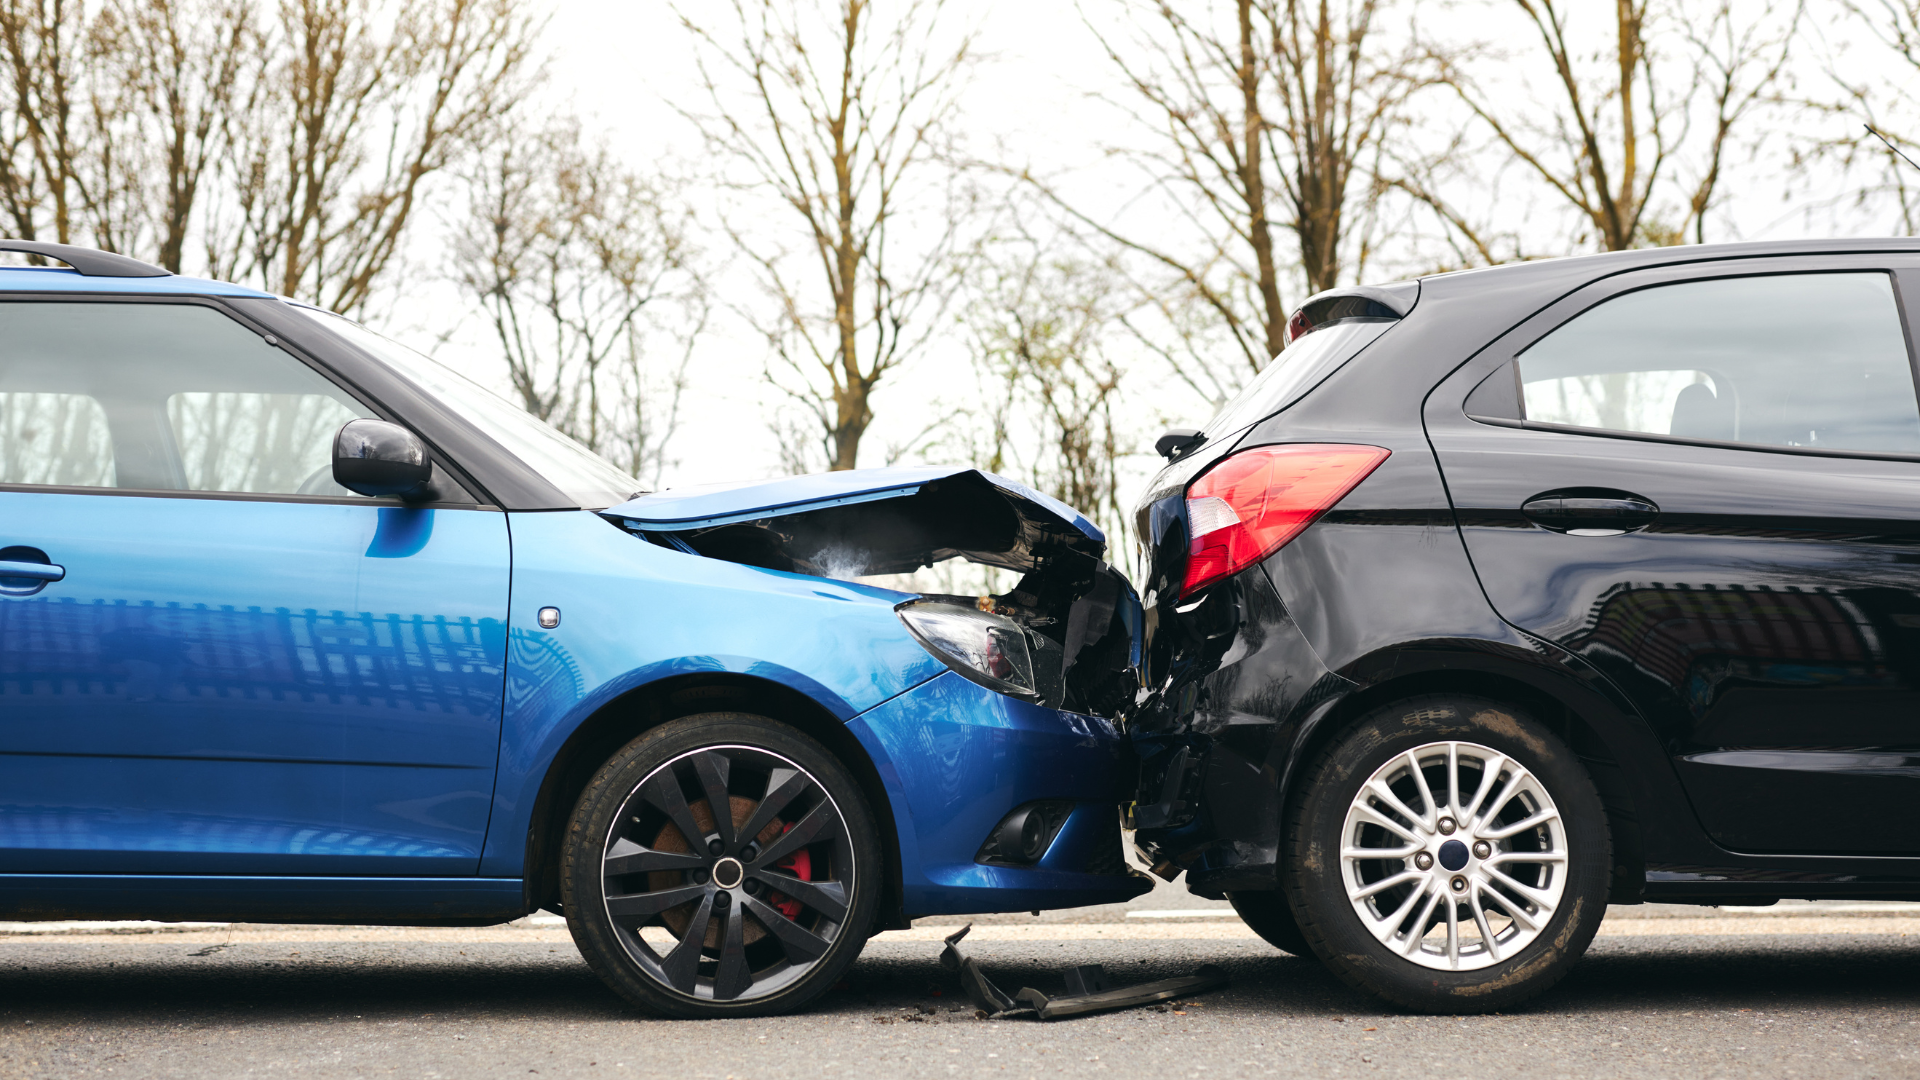 Even minor car accidents can lead to unseen injuries. Learn why prompt PT is crucial.